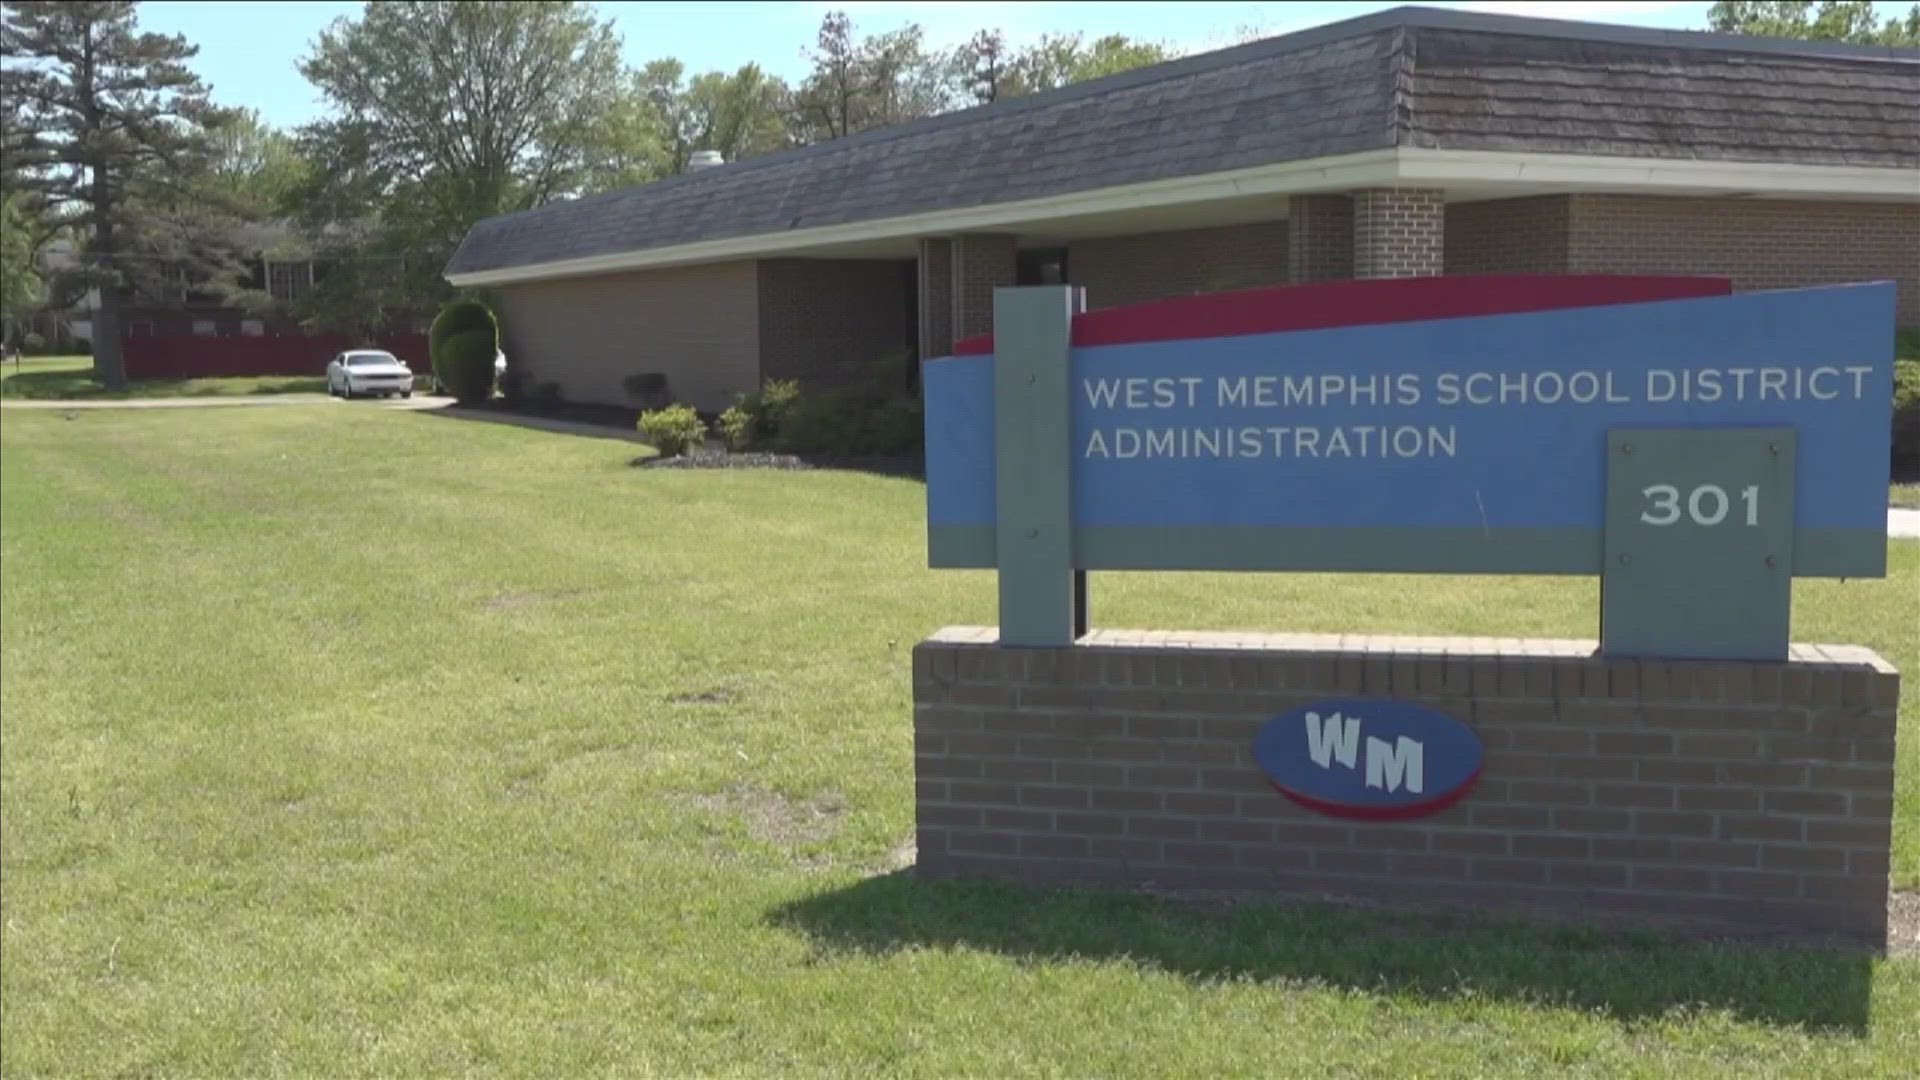 Richard Atwill, the former superintendent of West Memphis School district, was voted out in a 4-7 decision.